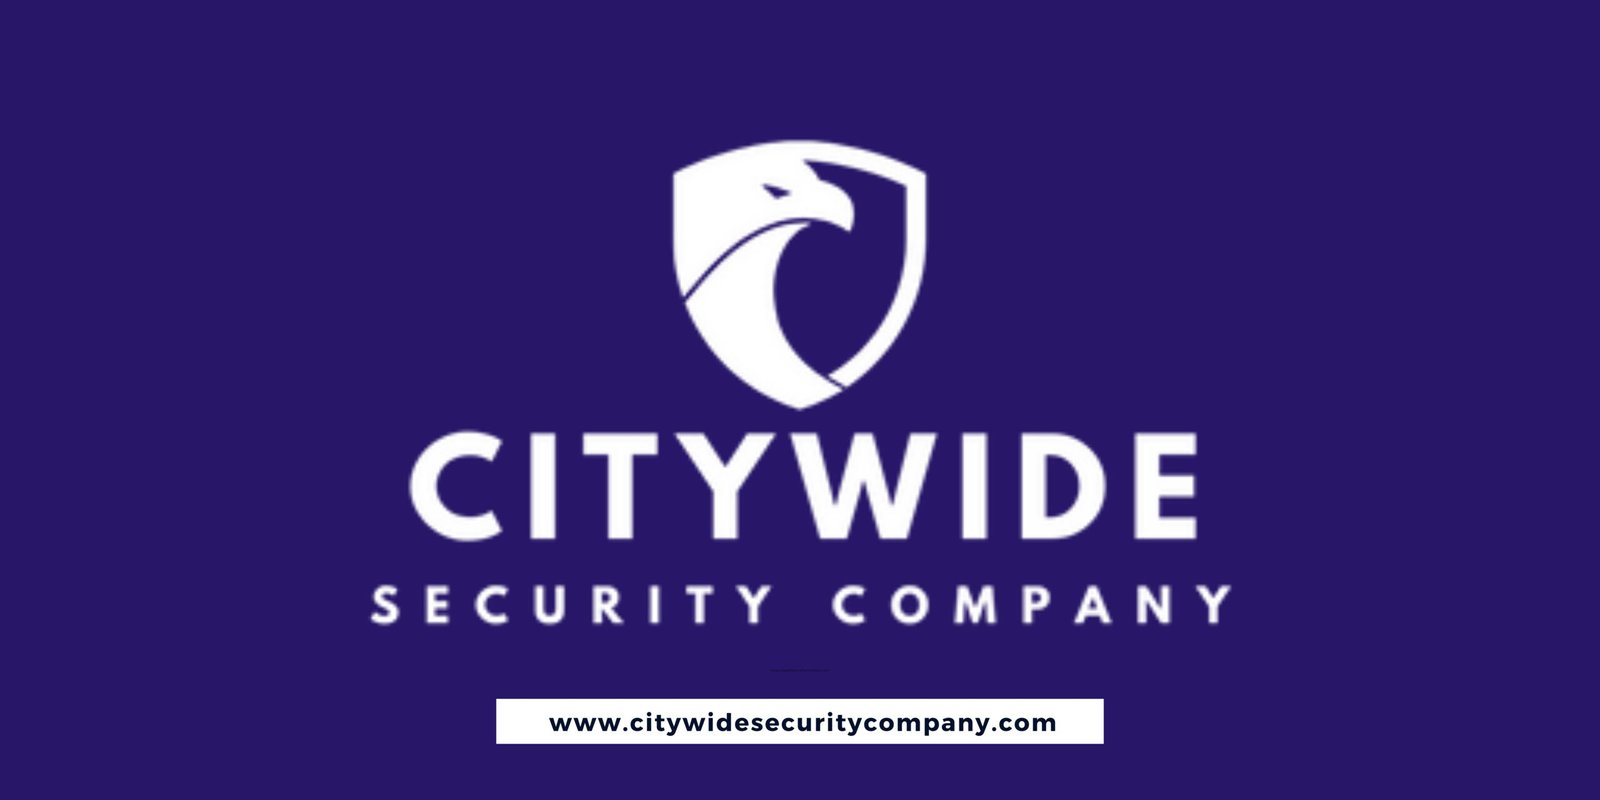 Citywide Security Company | Top-Rated Security Services